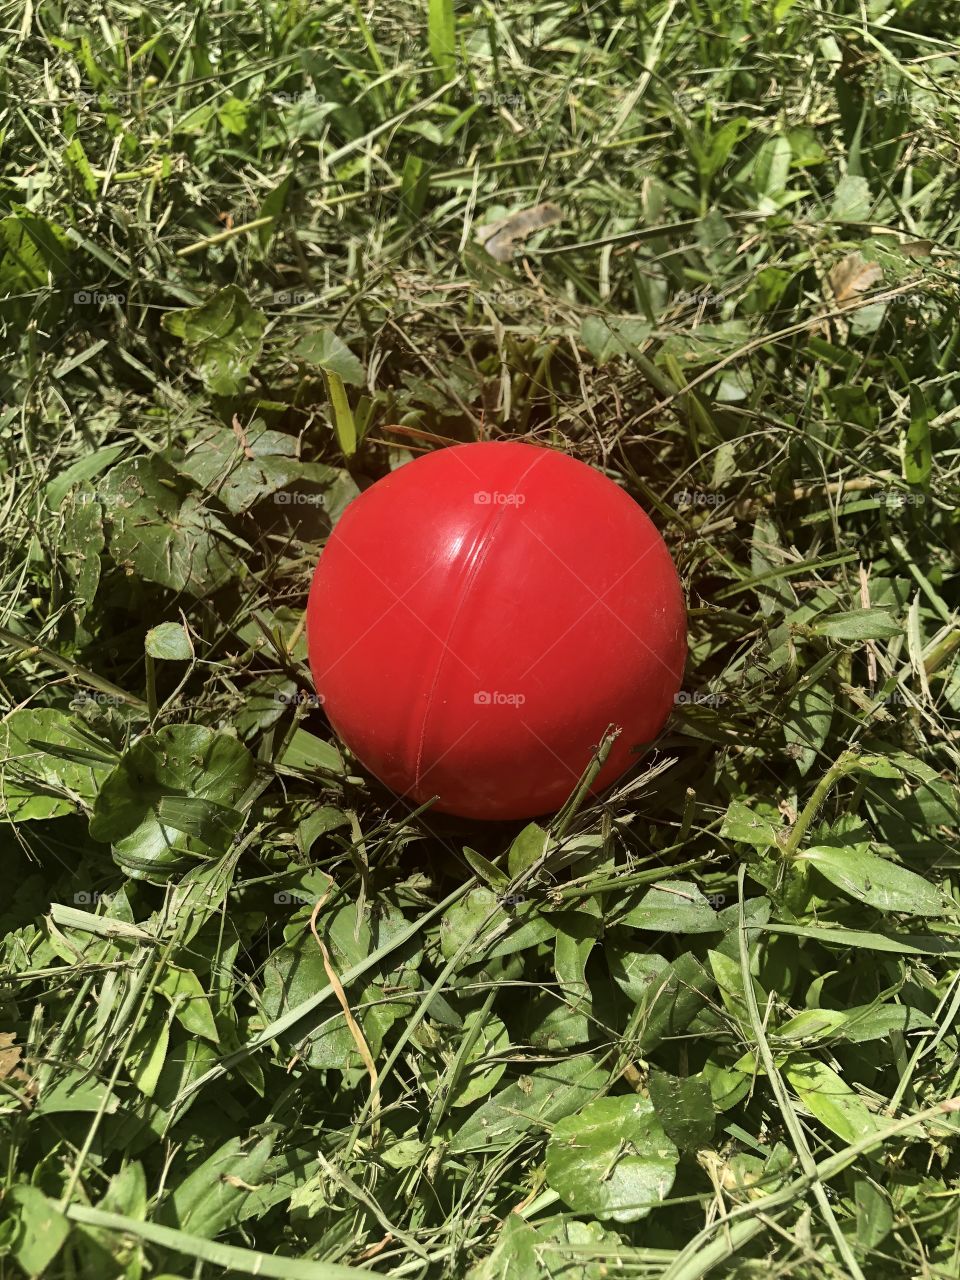 Colorful ball in grass 